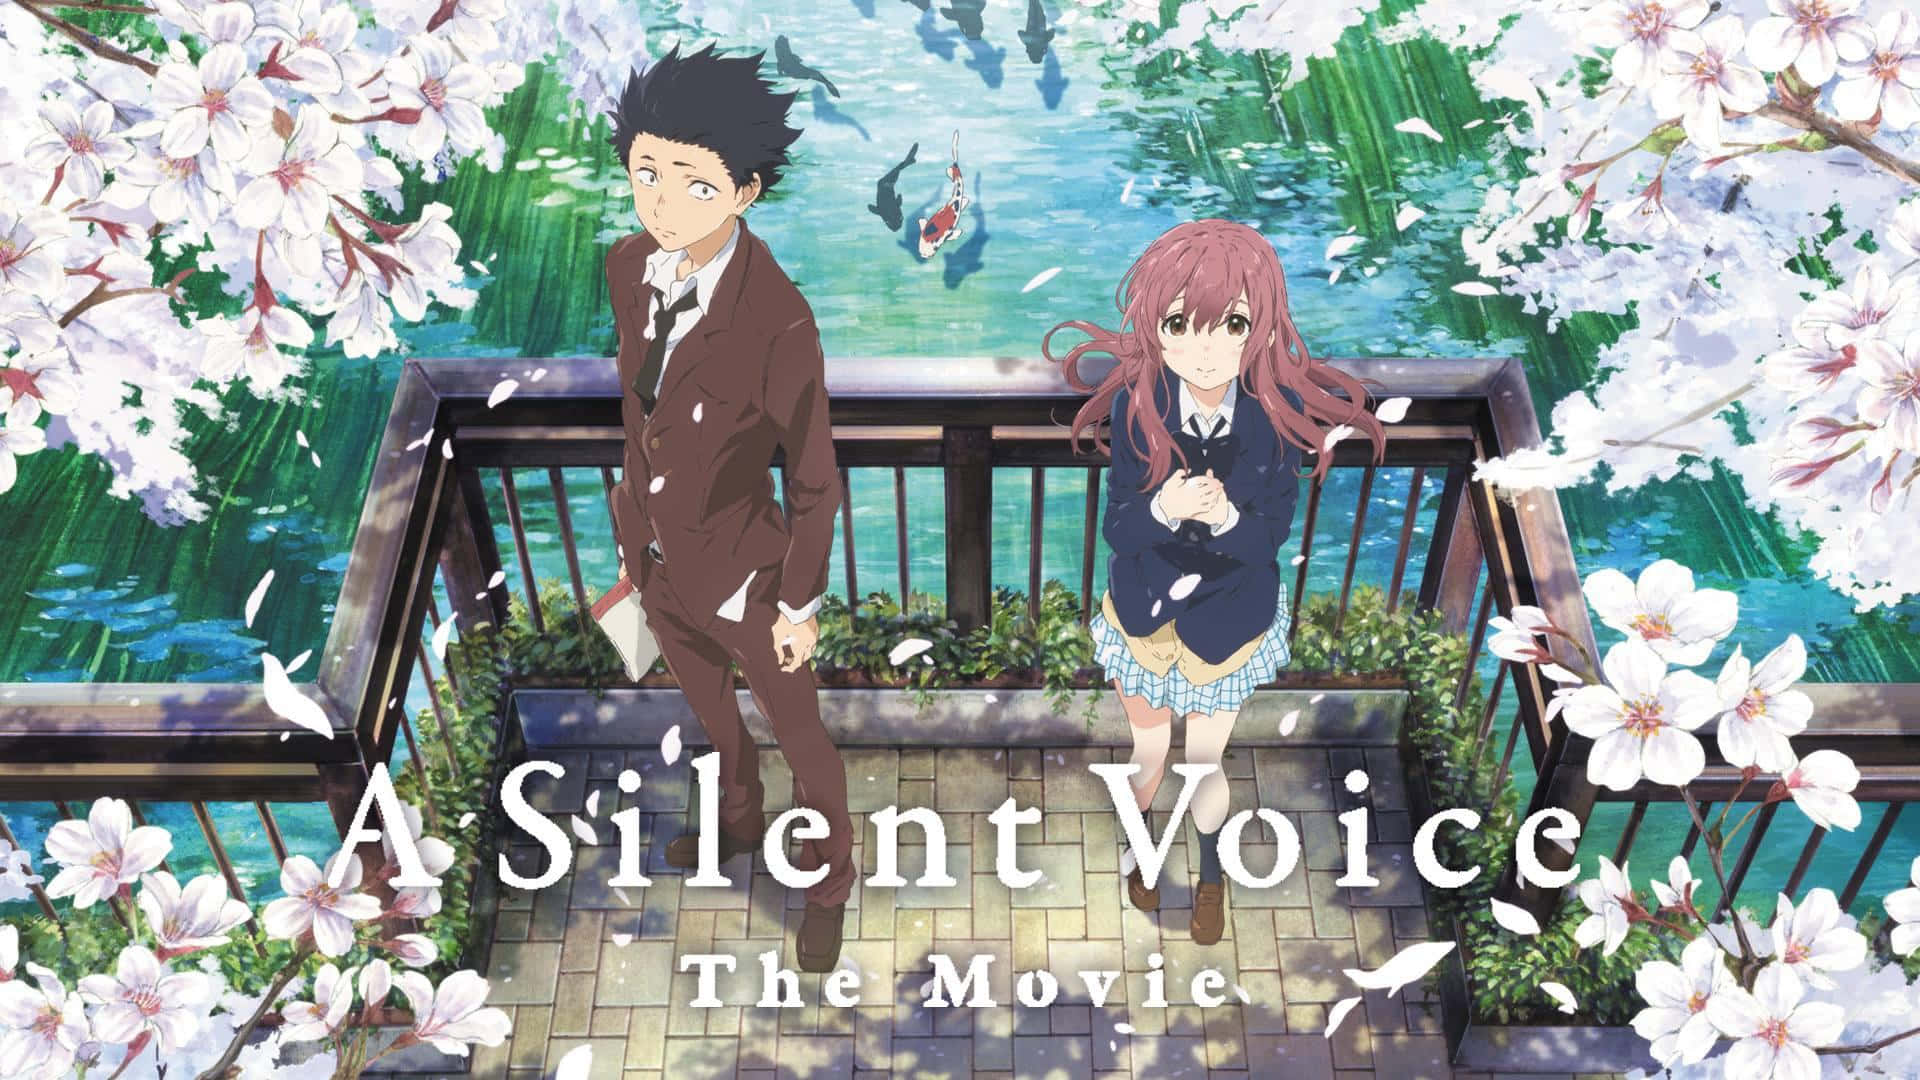 A Silent Voice - A Tale of Friendship and Forgiveness